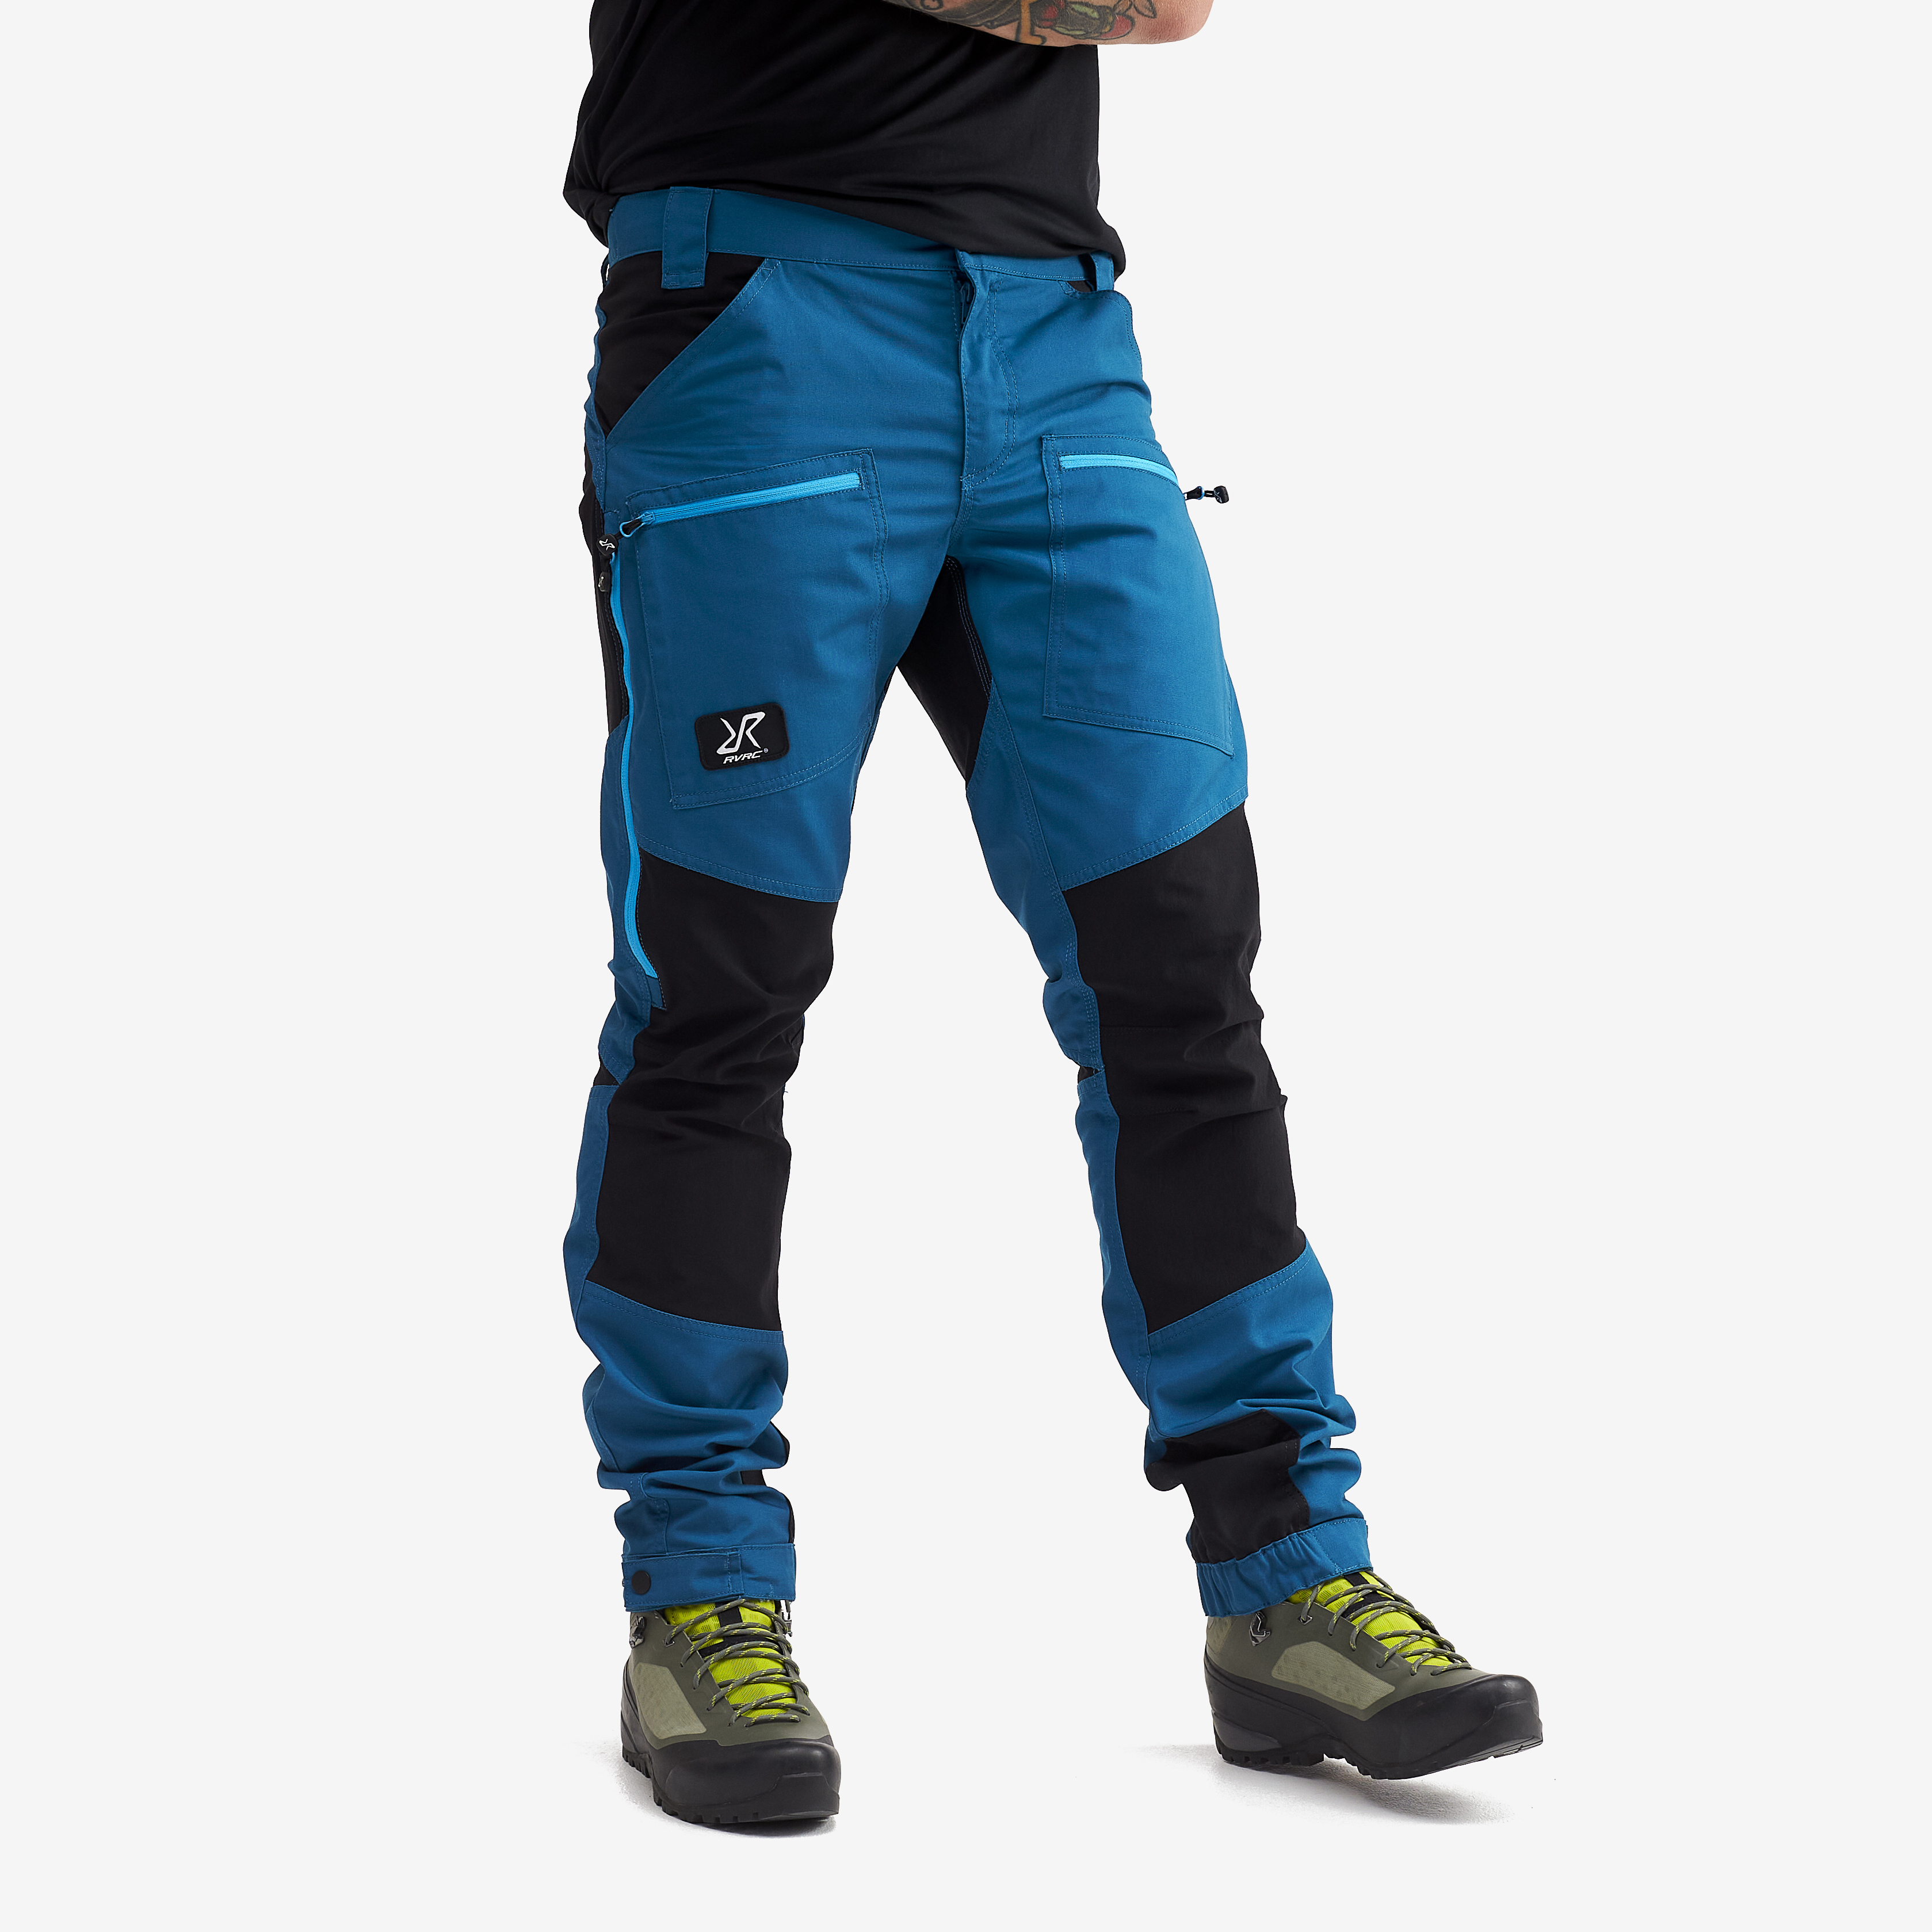 Nordwand Pro hiking trousers for men in blue